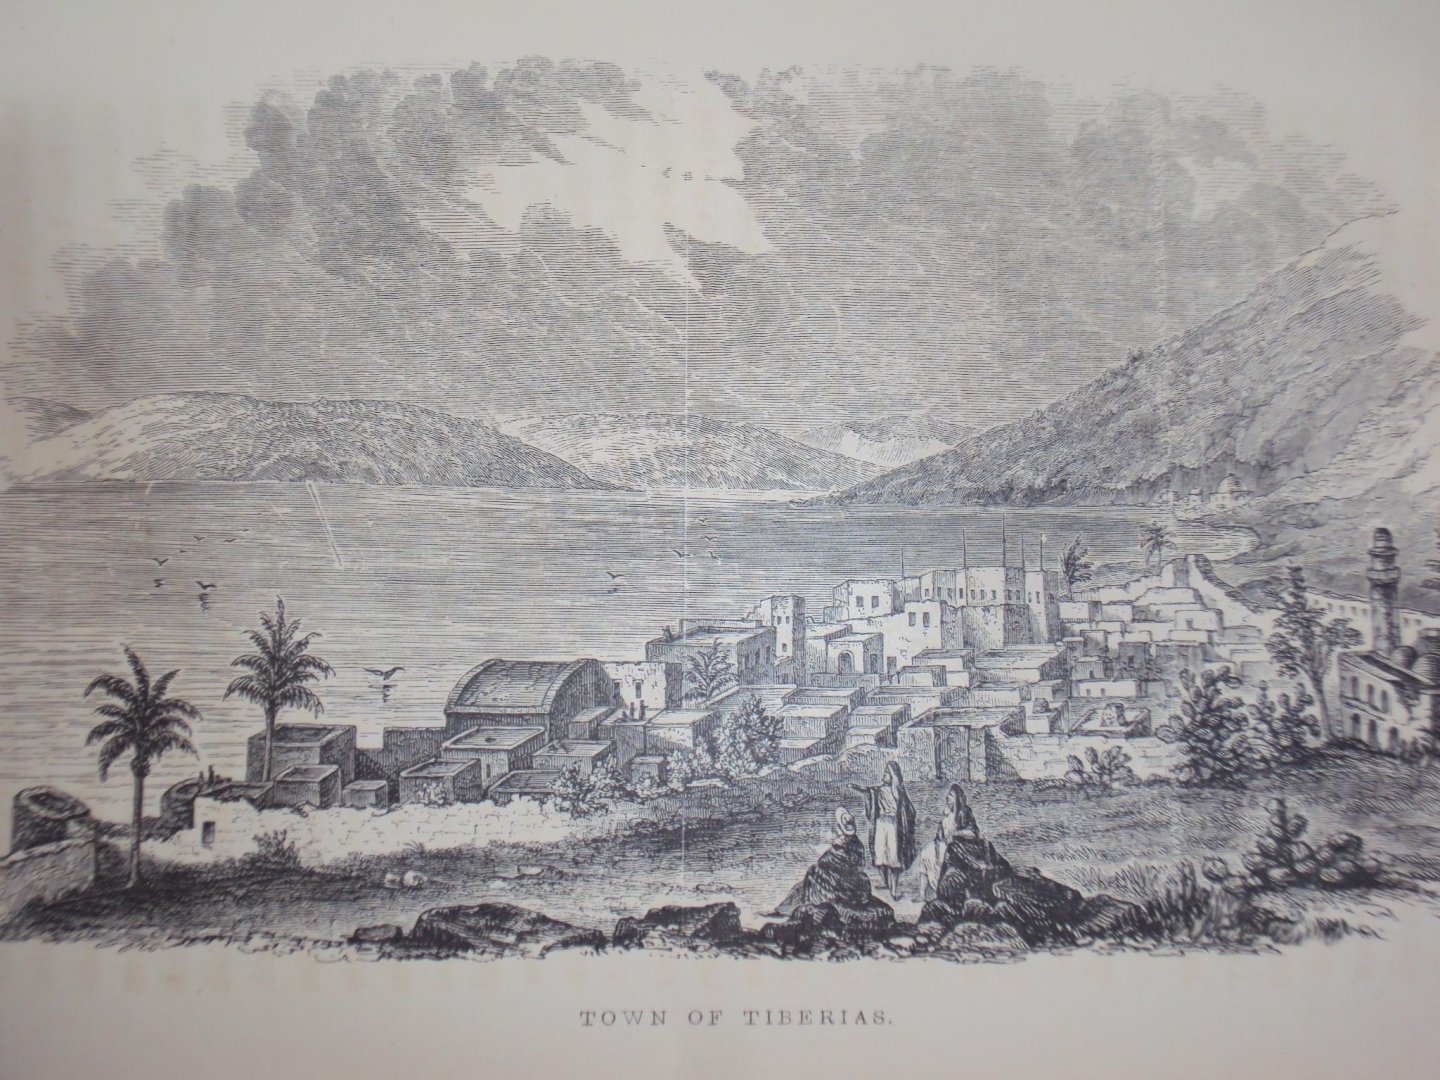 W.F. Lynch - Narrative of the United States Expedition to the river Jordan and the dead sea